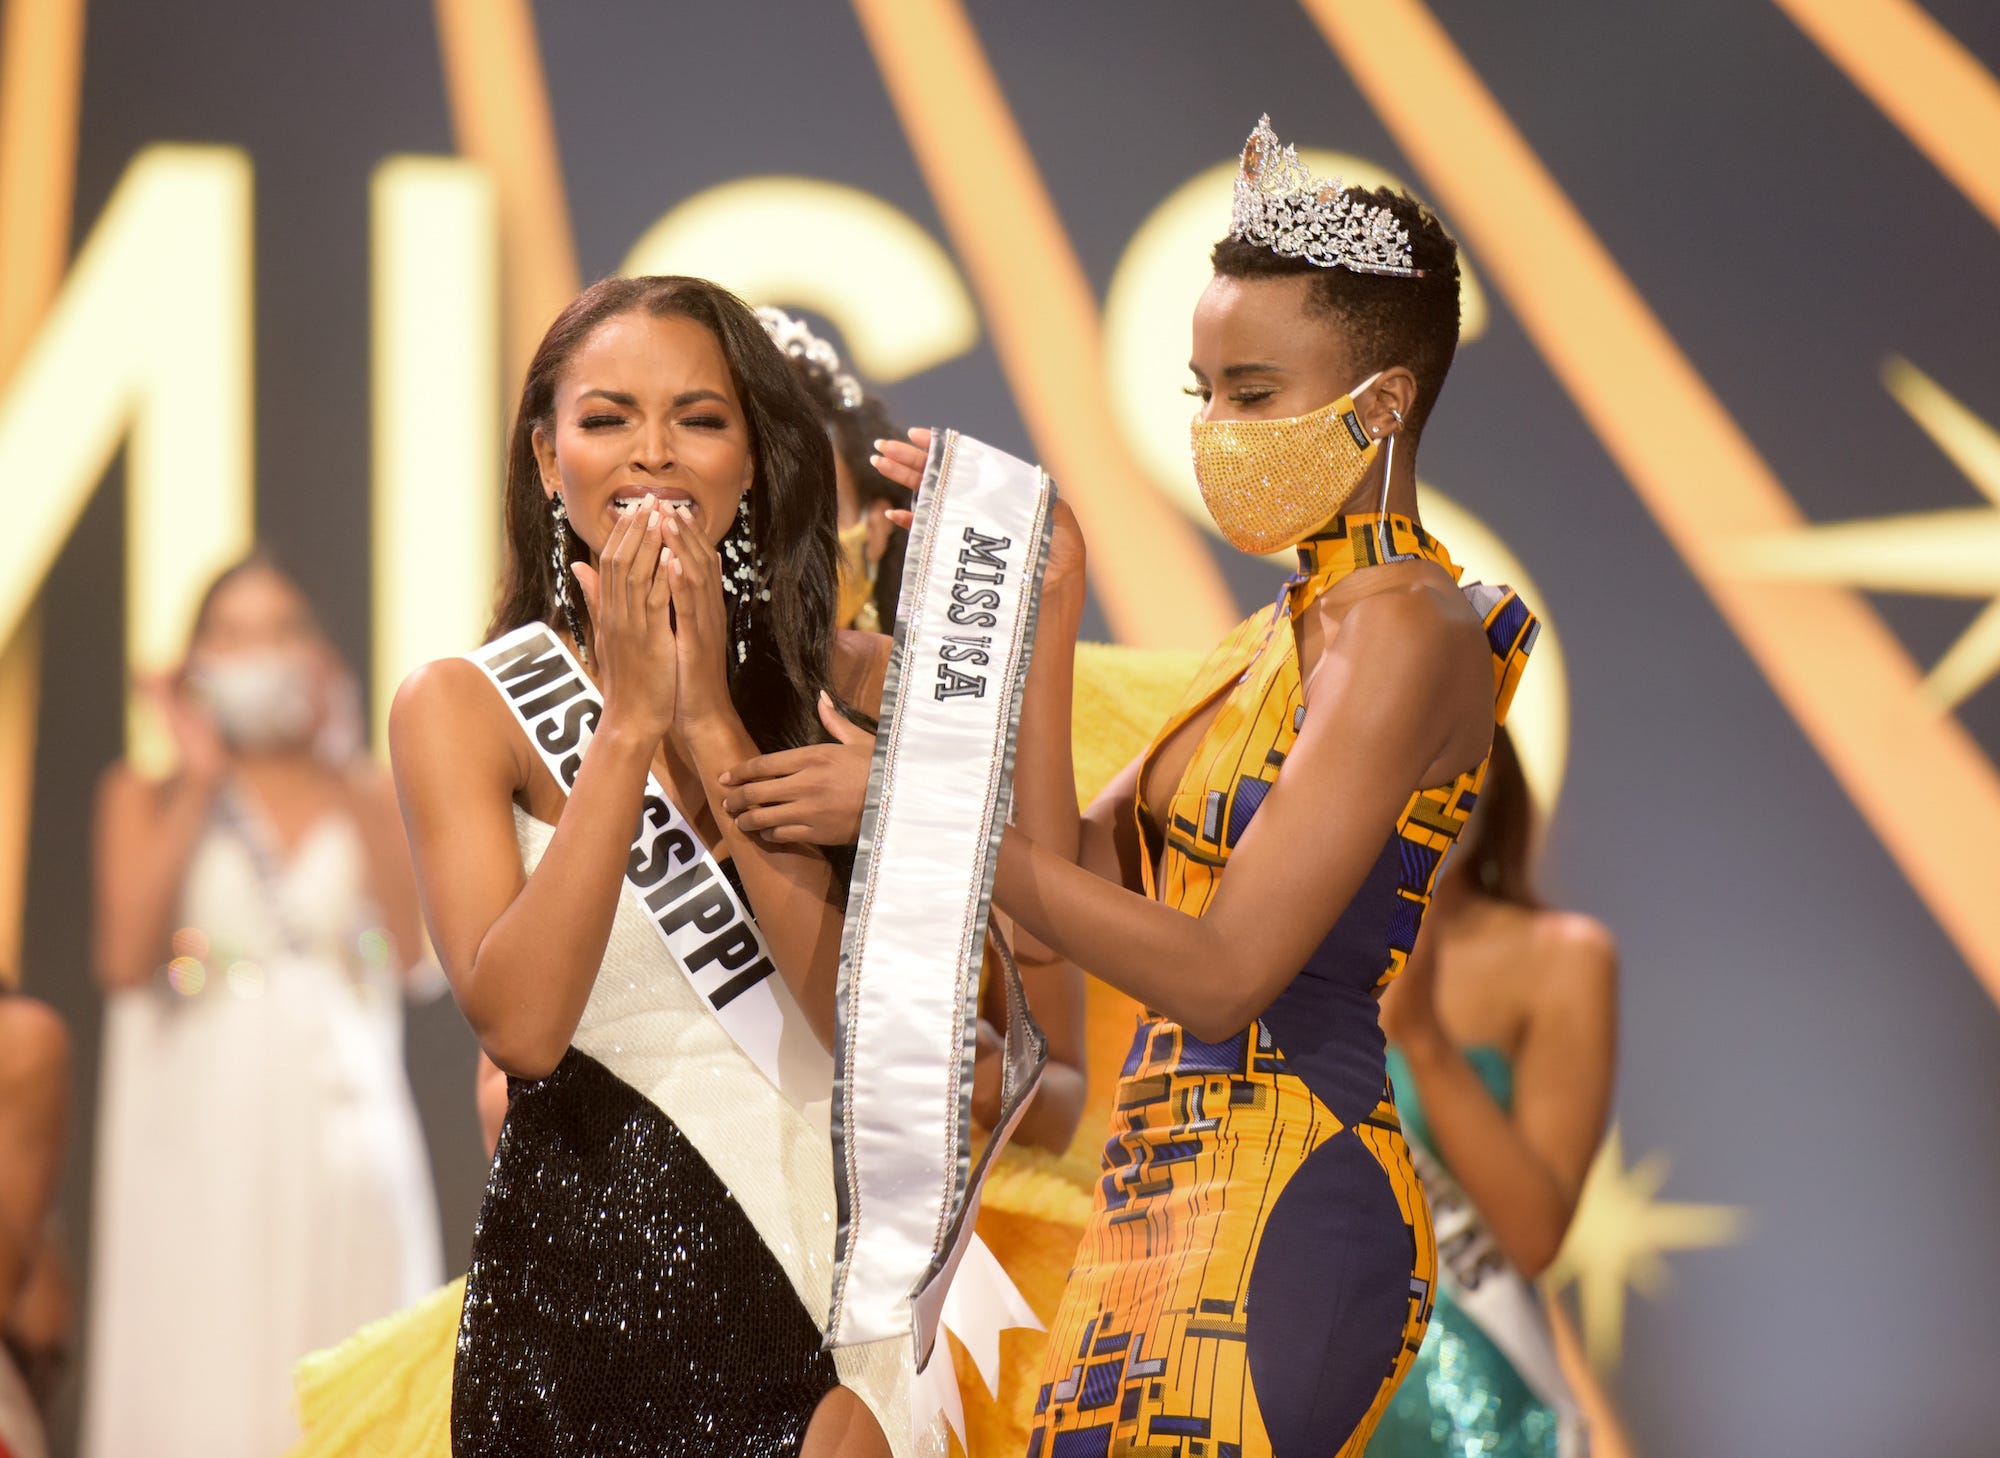 Photos show the emotional moment Miss Mississippi Asya Branch was